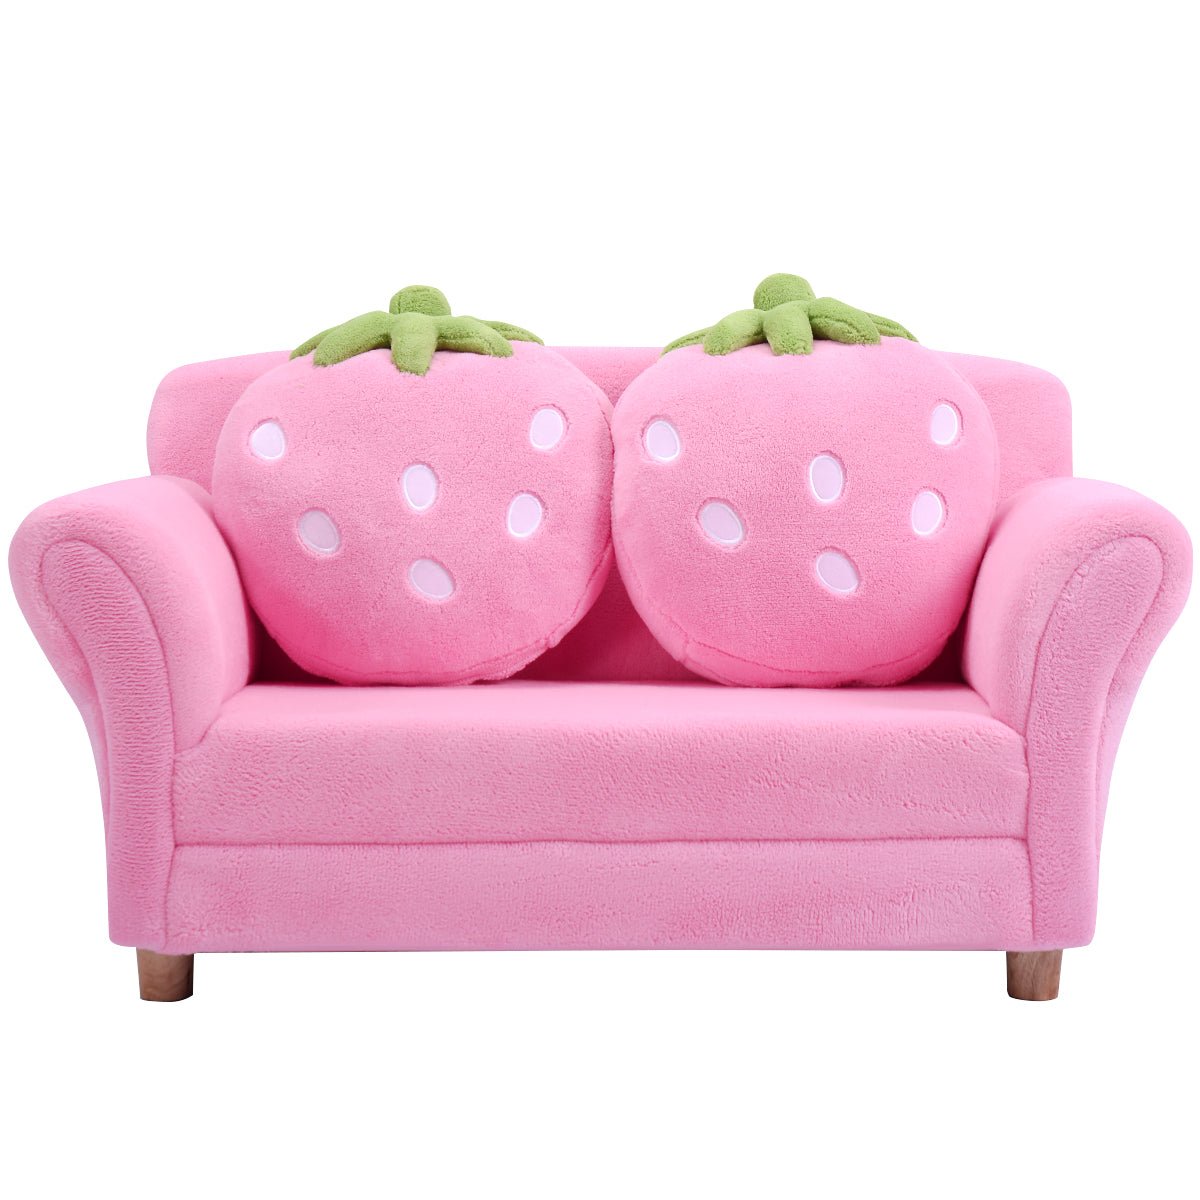 Kids 2-Seat Sofa with Strawberry Pillows: Cozy Lounge Bed for Children